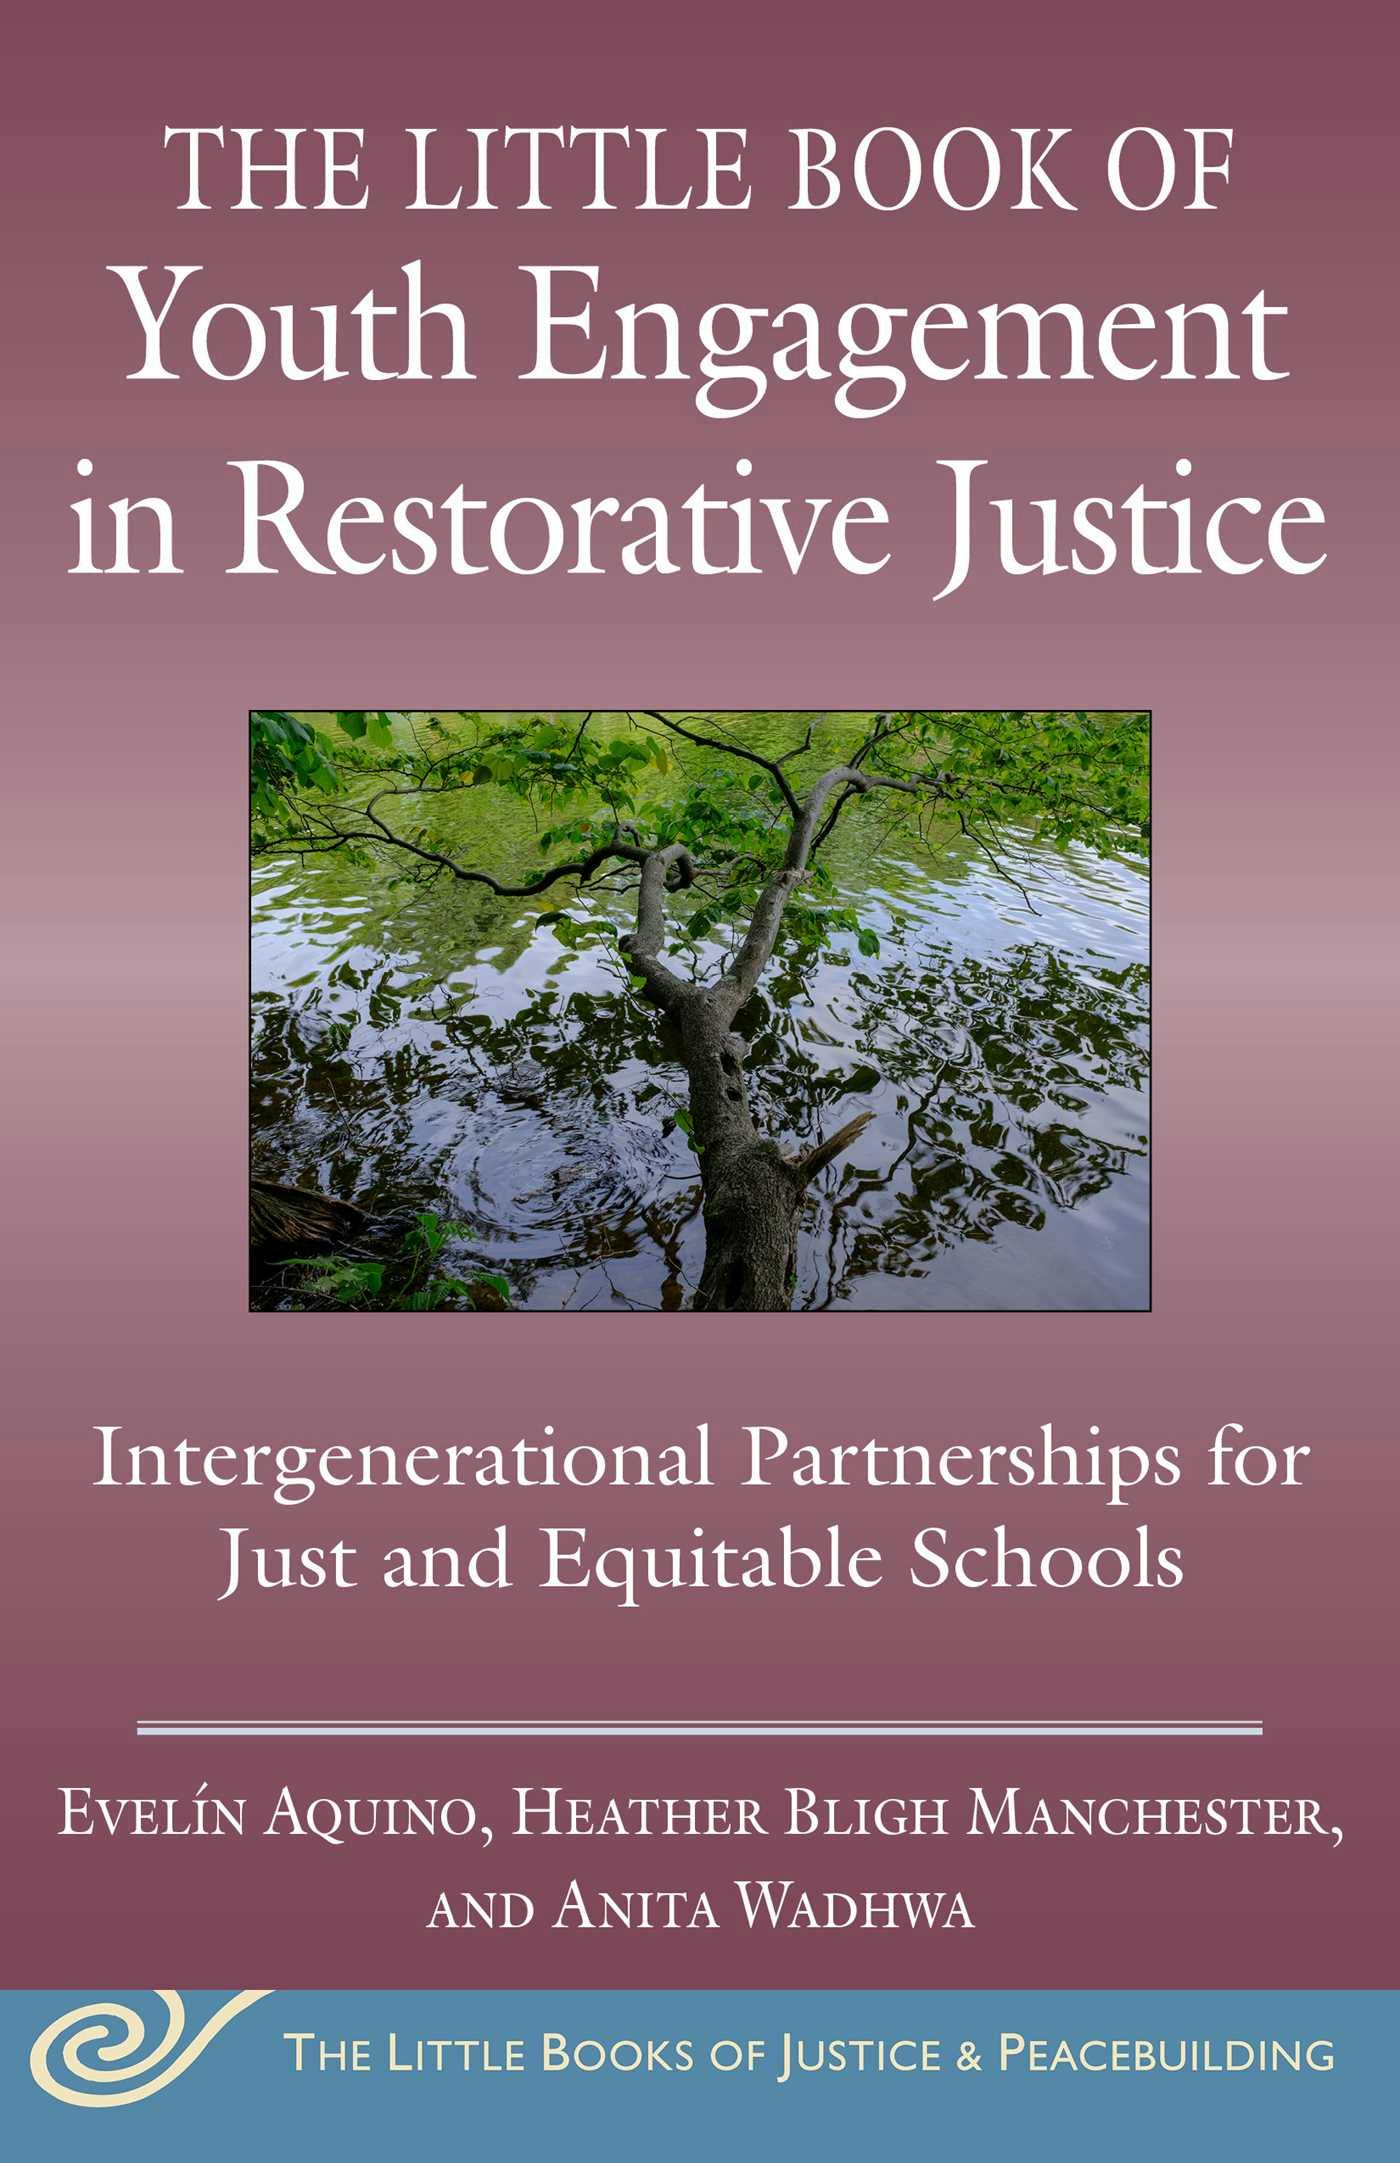 The Little Book of Youth Engagement in Restorative Justice: Intergenerational Partnerships for Just and Equitable Schools - Anita Wadhwa, Evelín Aquino, Heather Bligh Manchester